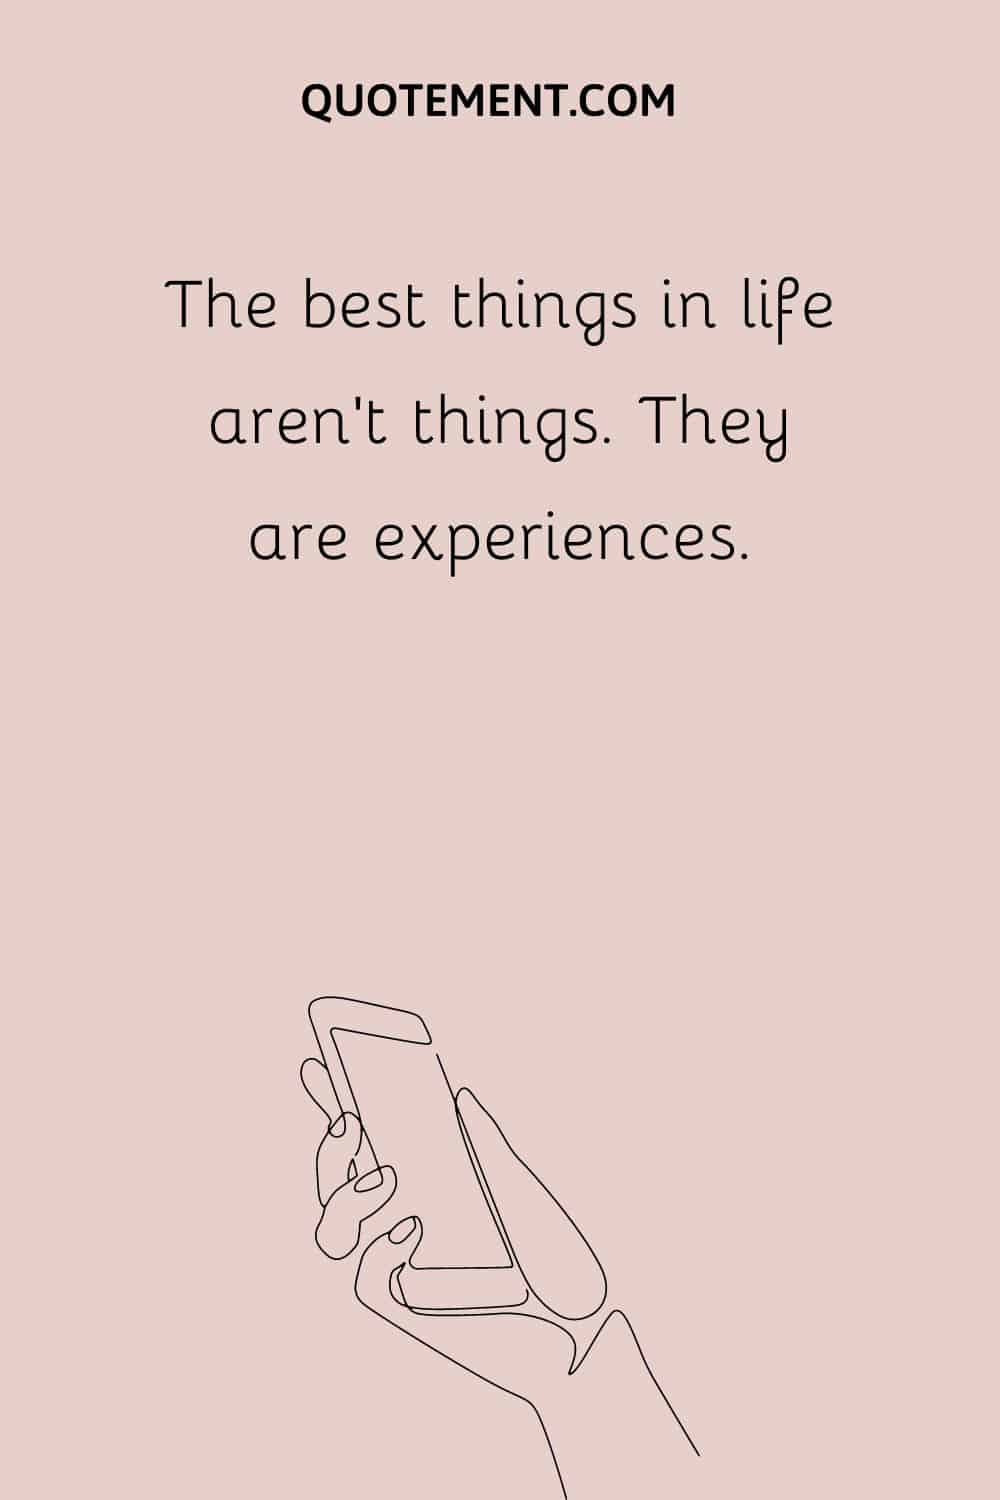 The best things in life aren’t things